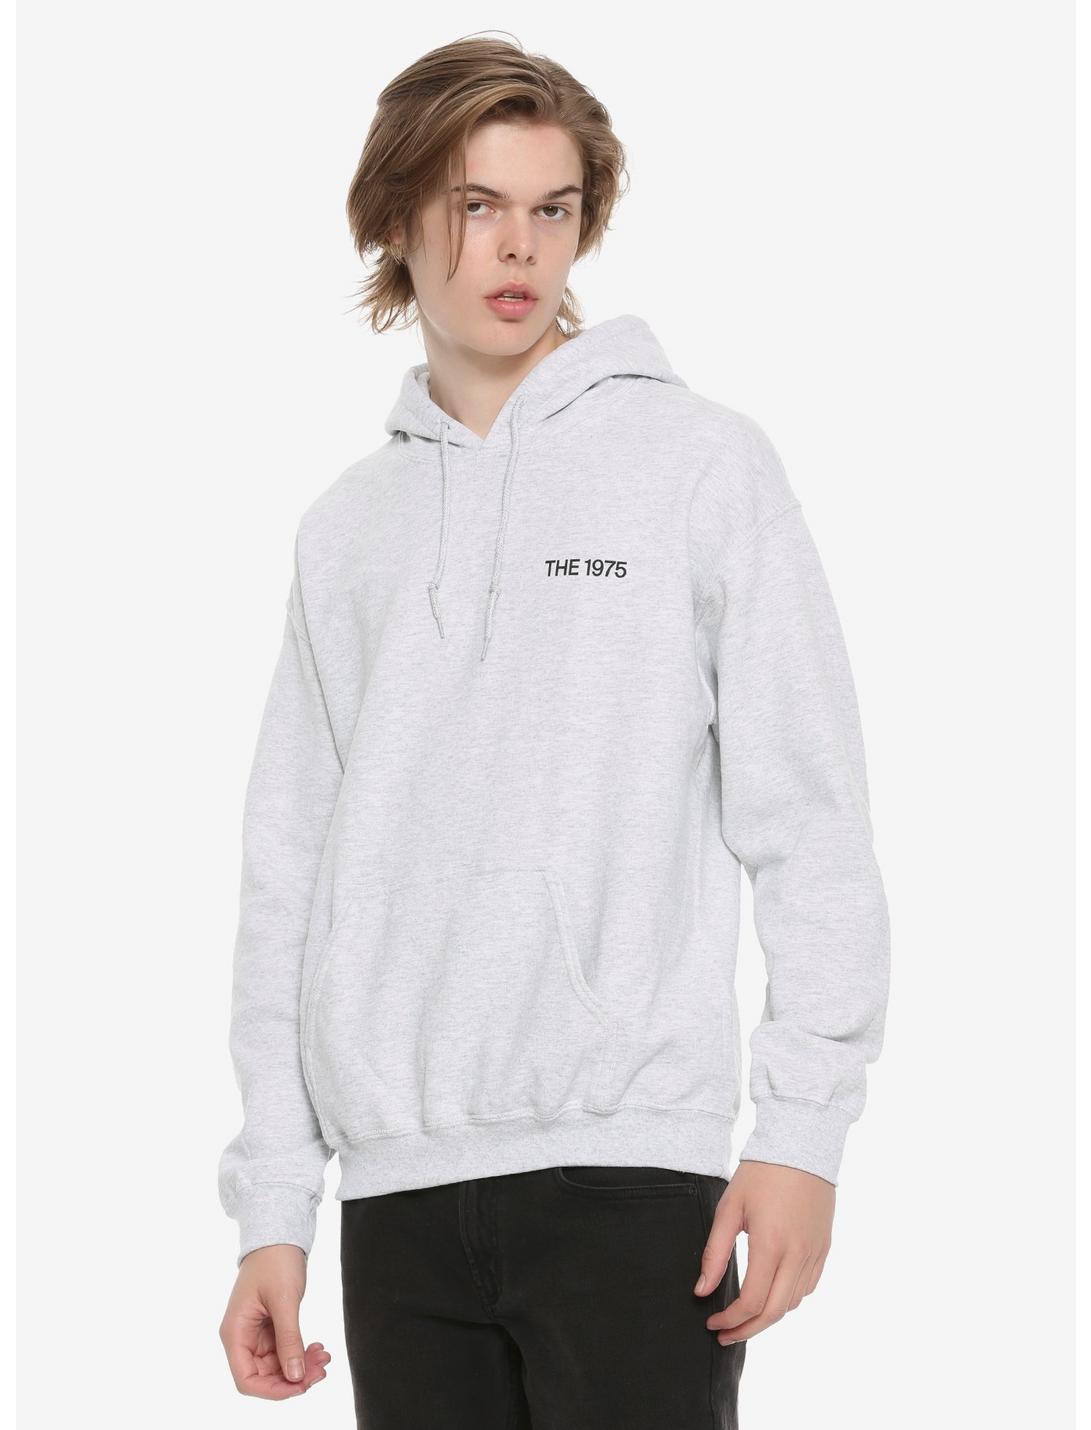 The 1975 Music For Cars Hoodie, BLACK, hi-res